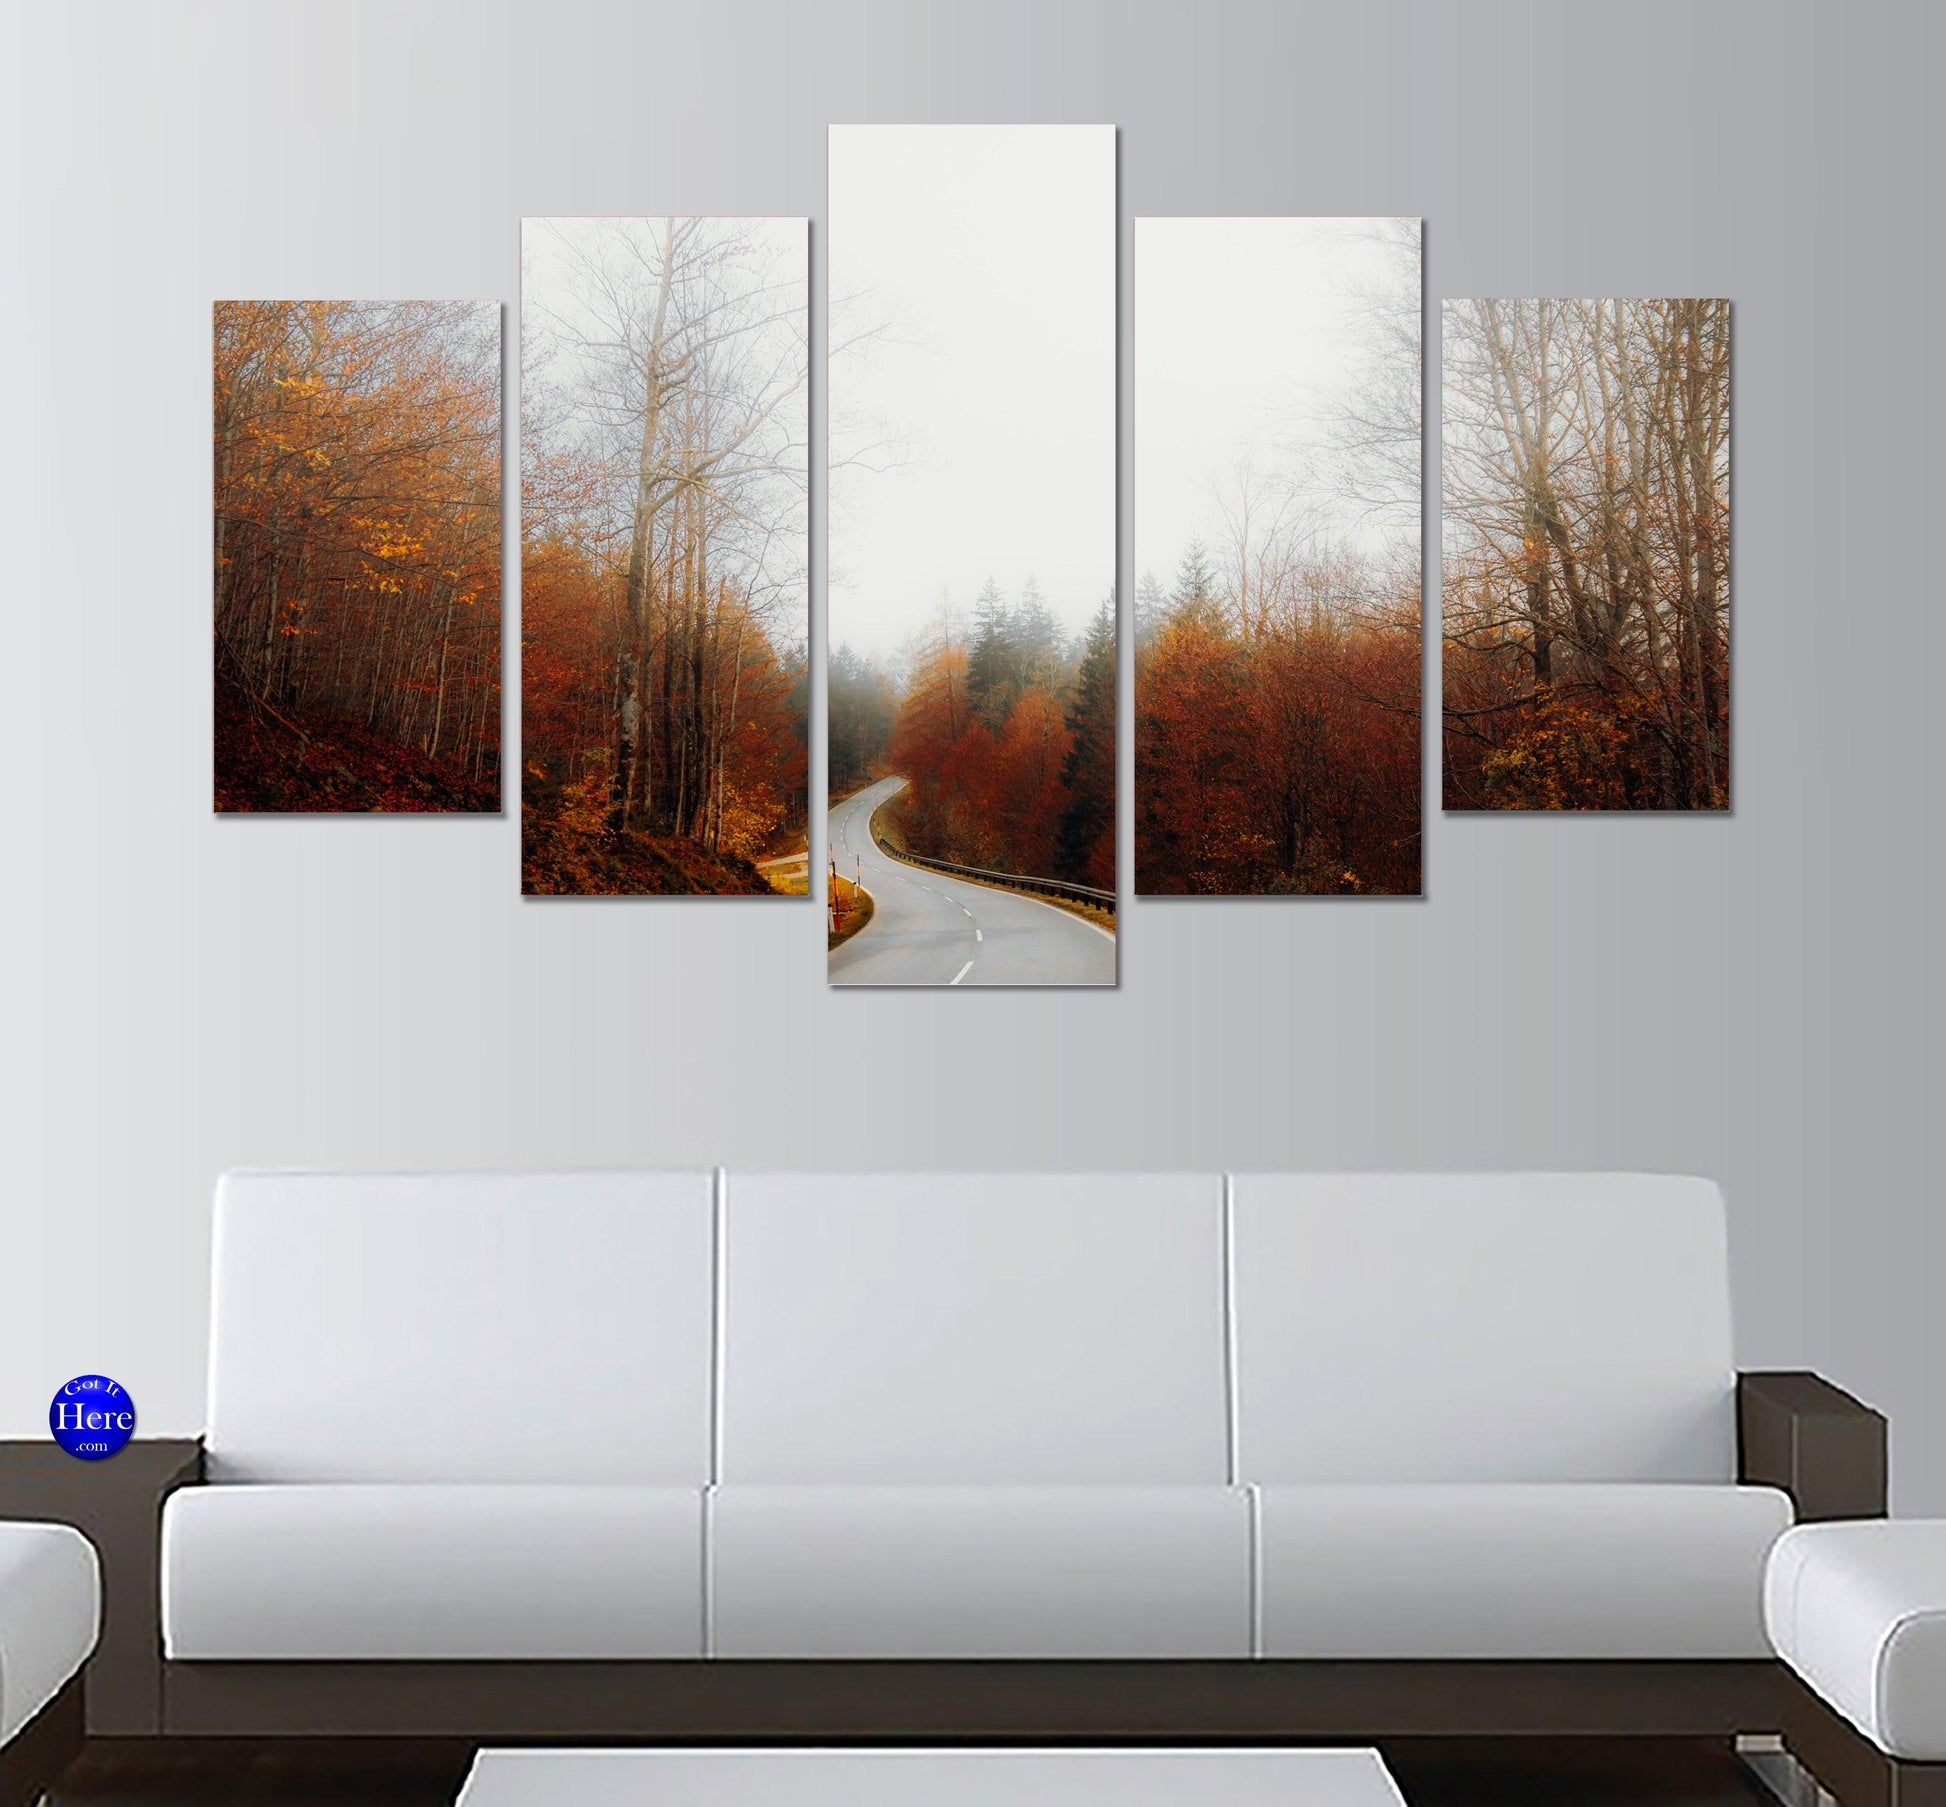 Autumn Country Road Fall 5 Panel Canvas Print Wall Art - GotItHere.com